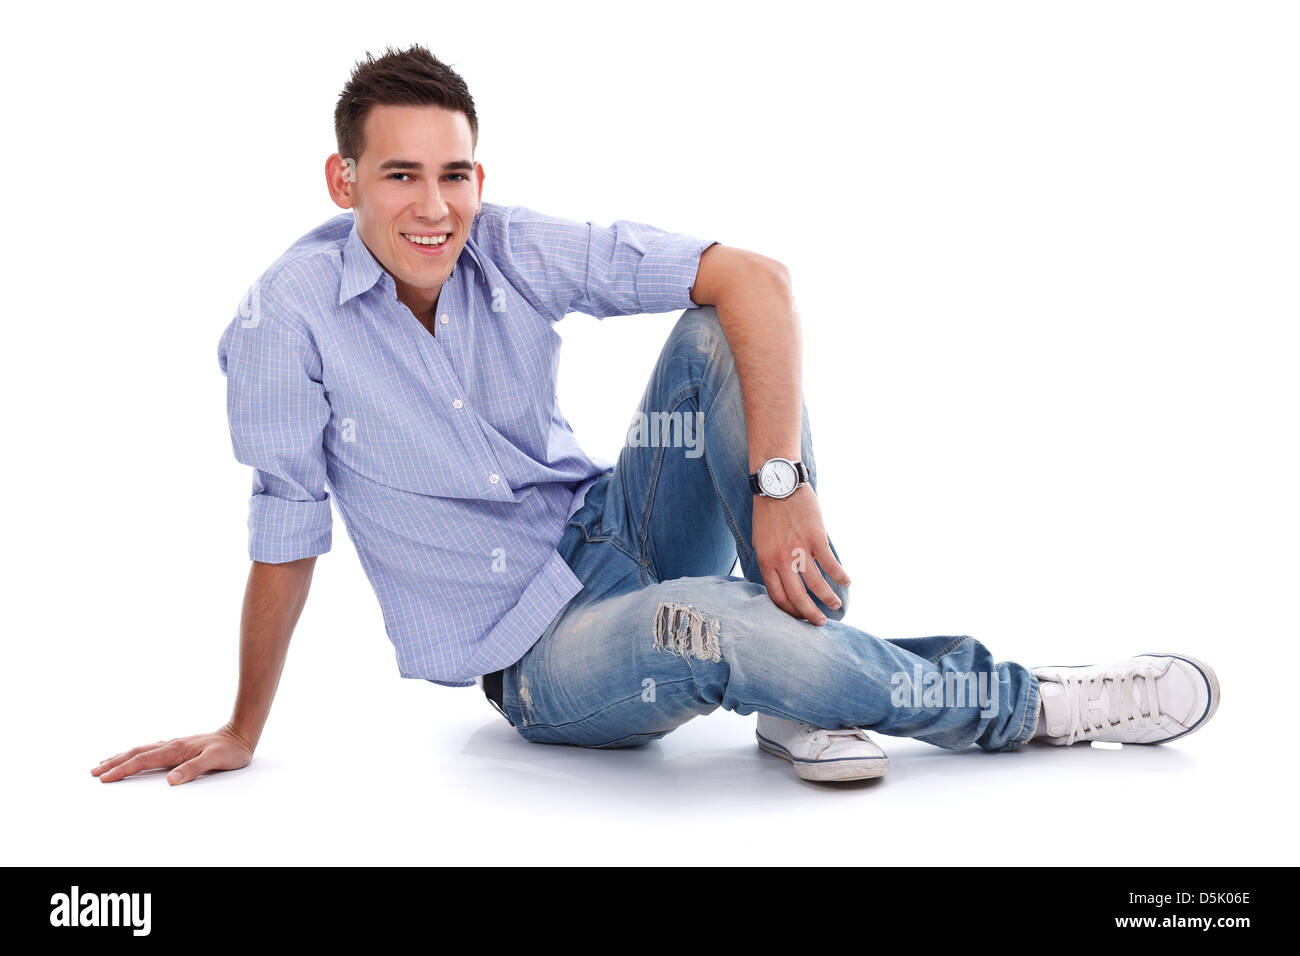 Smiling young man relaxing on the floor, looking to the camera on white background Stock Photo